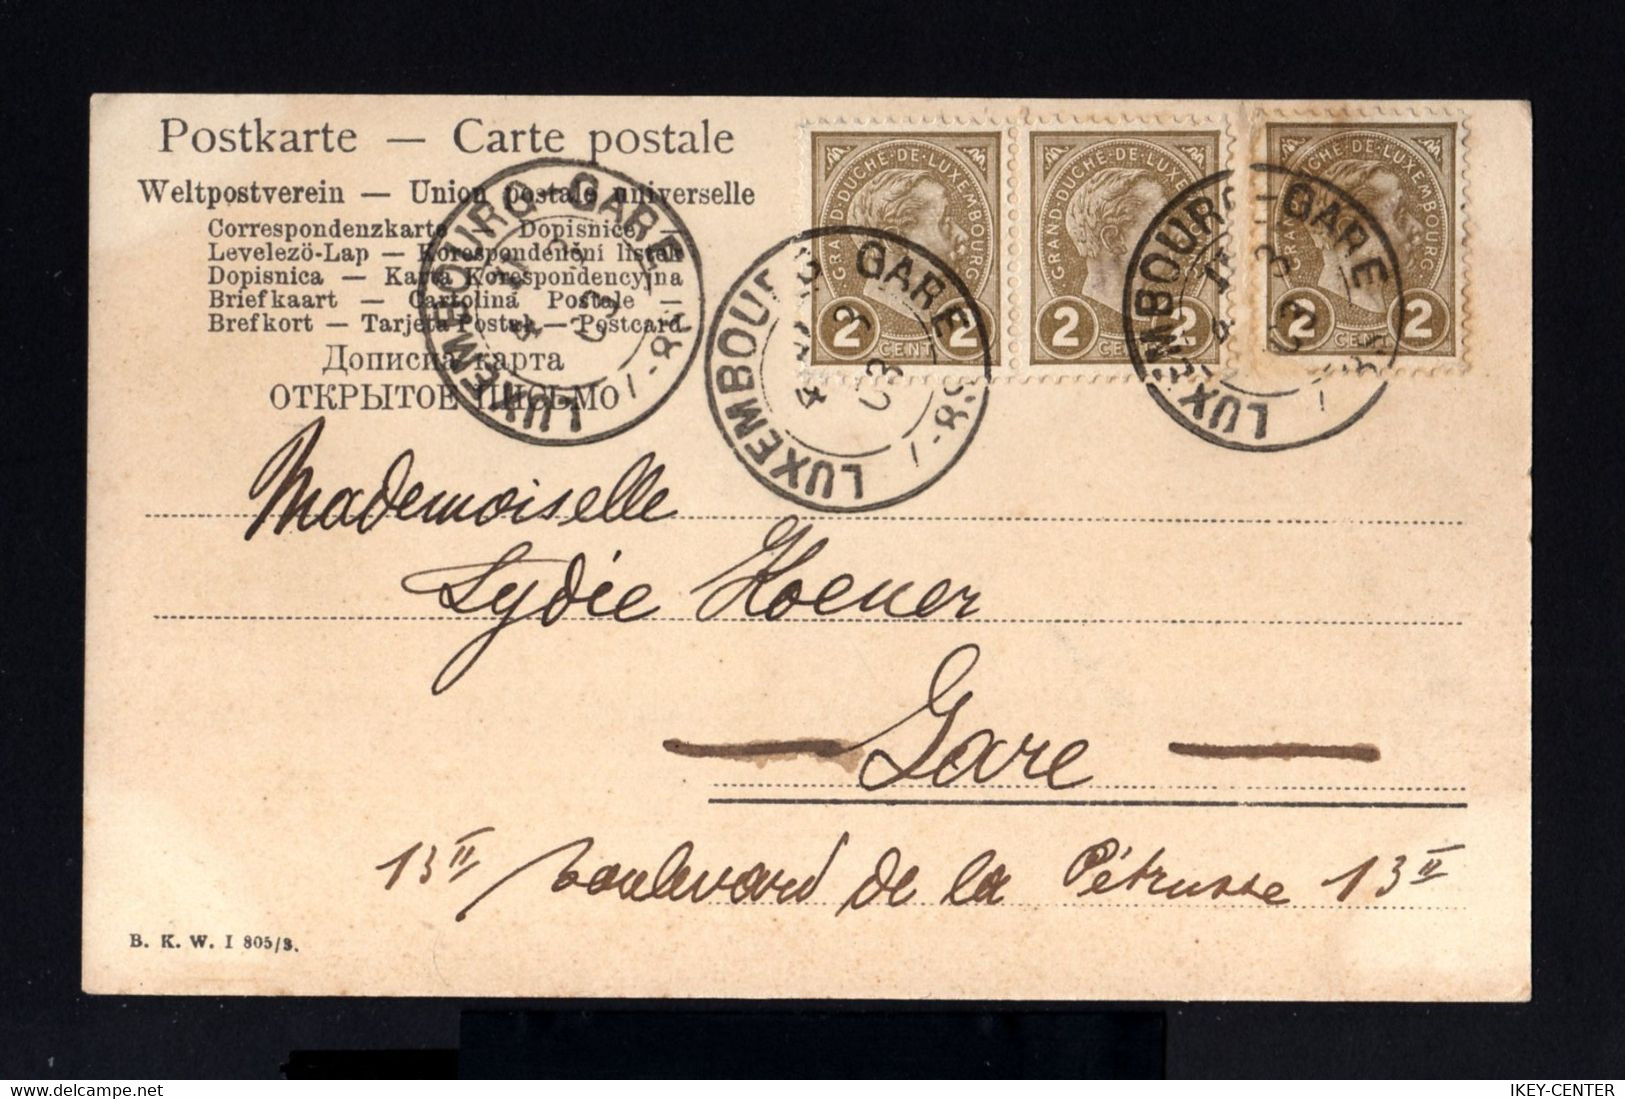 6101-LUXEMBURG-OLD POSTCARD LUXEMBOURG GARE.1903.WWII.Carte Postale LUXEMBOURG - 1895 Adolphe De Profil